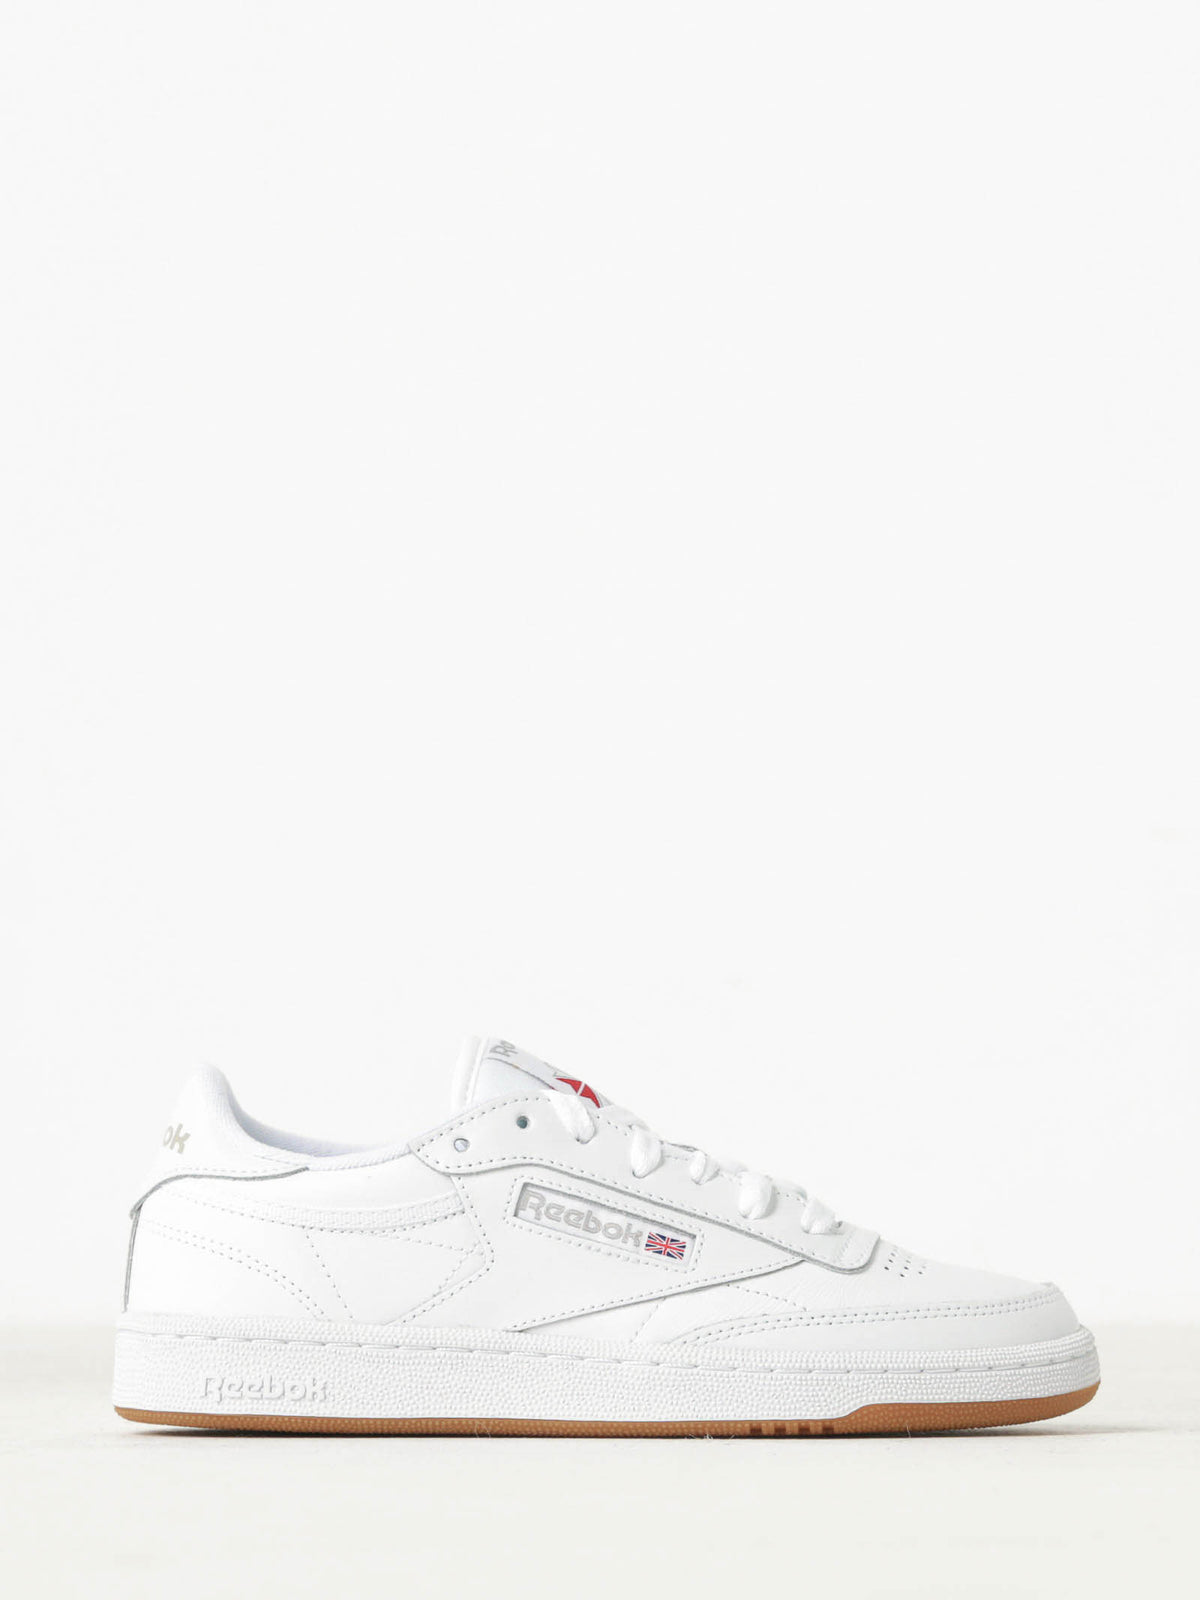 Womens Club C 85 Sneakers in White Leather